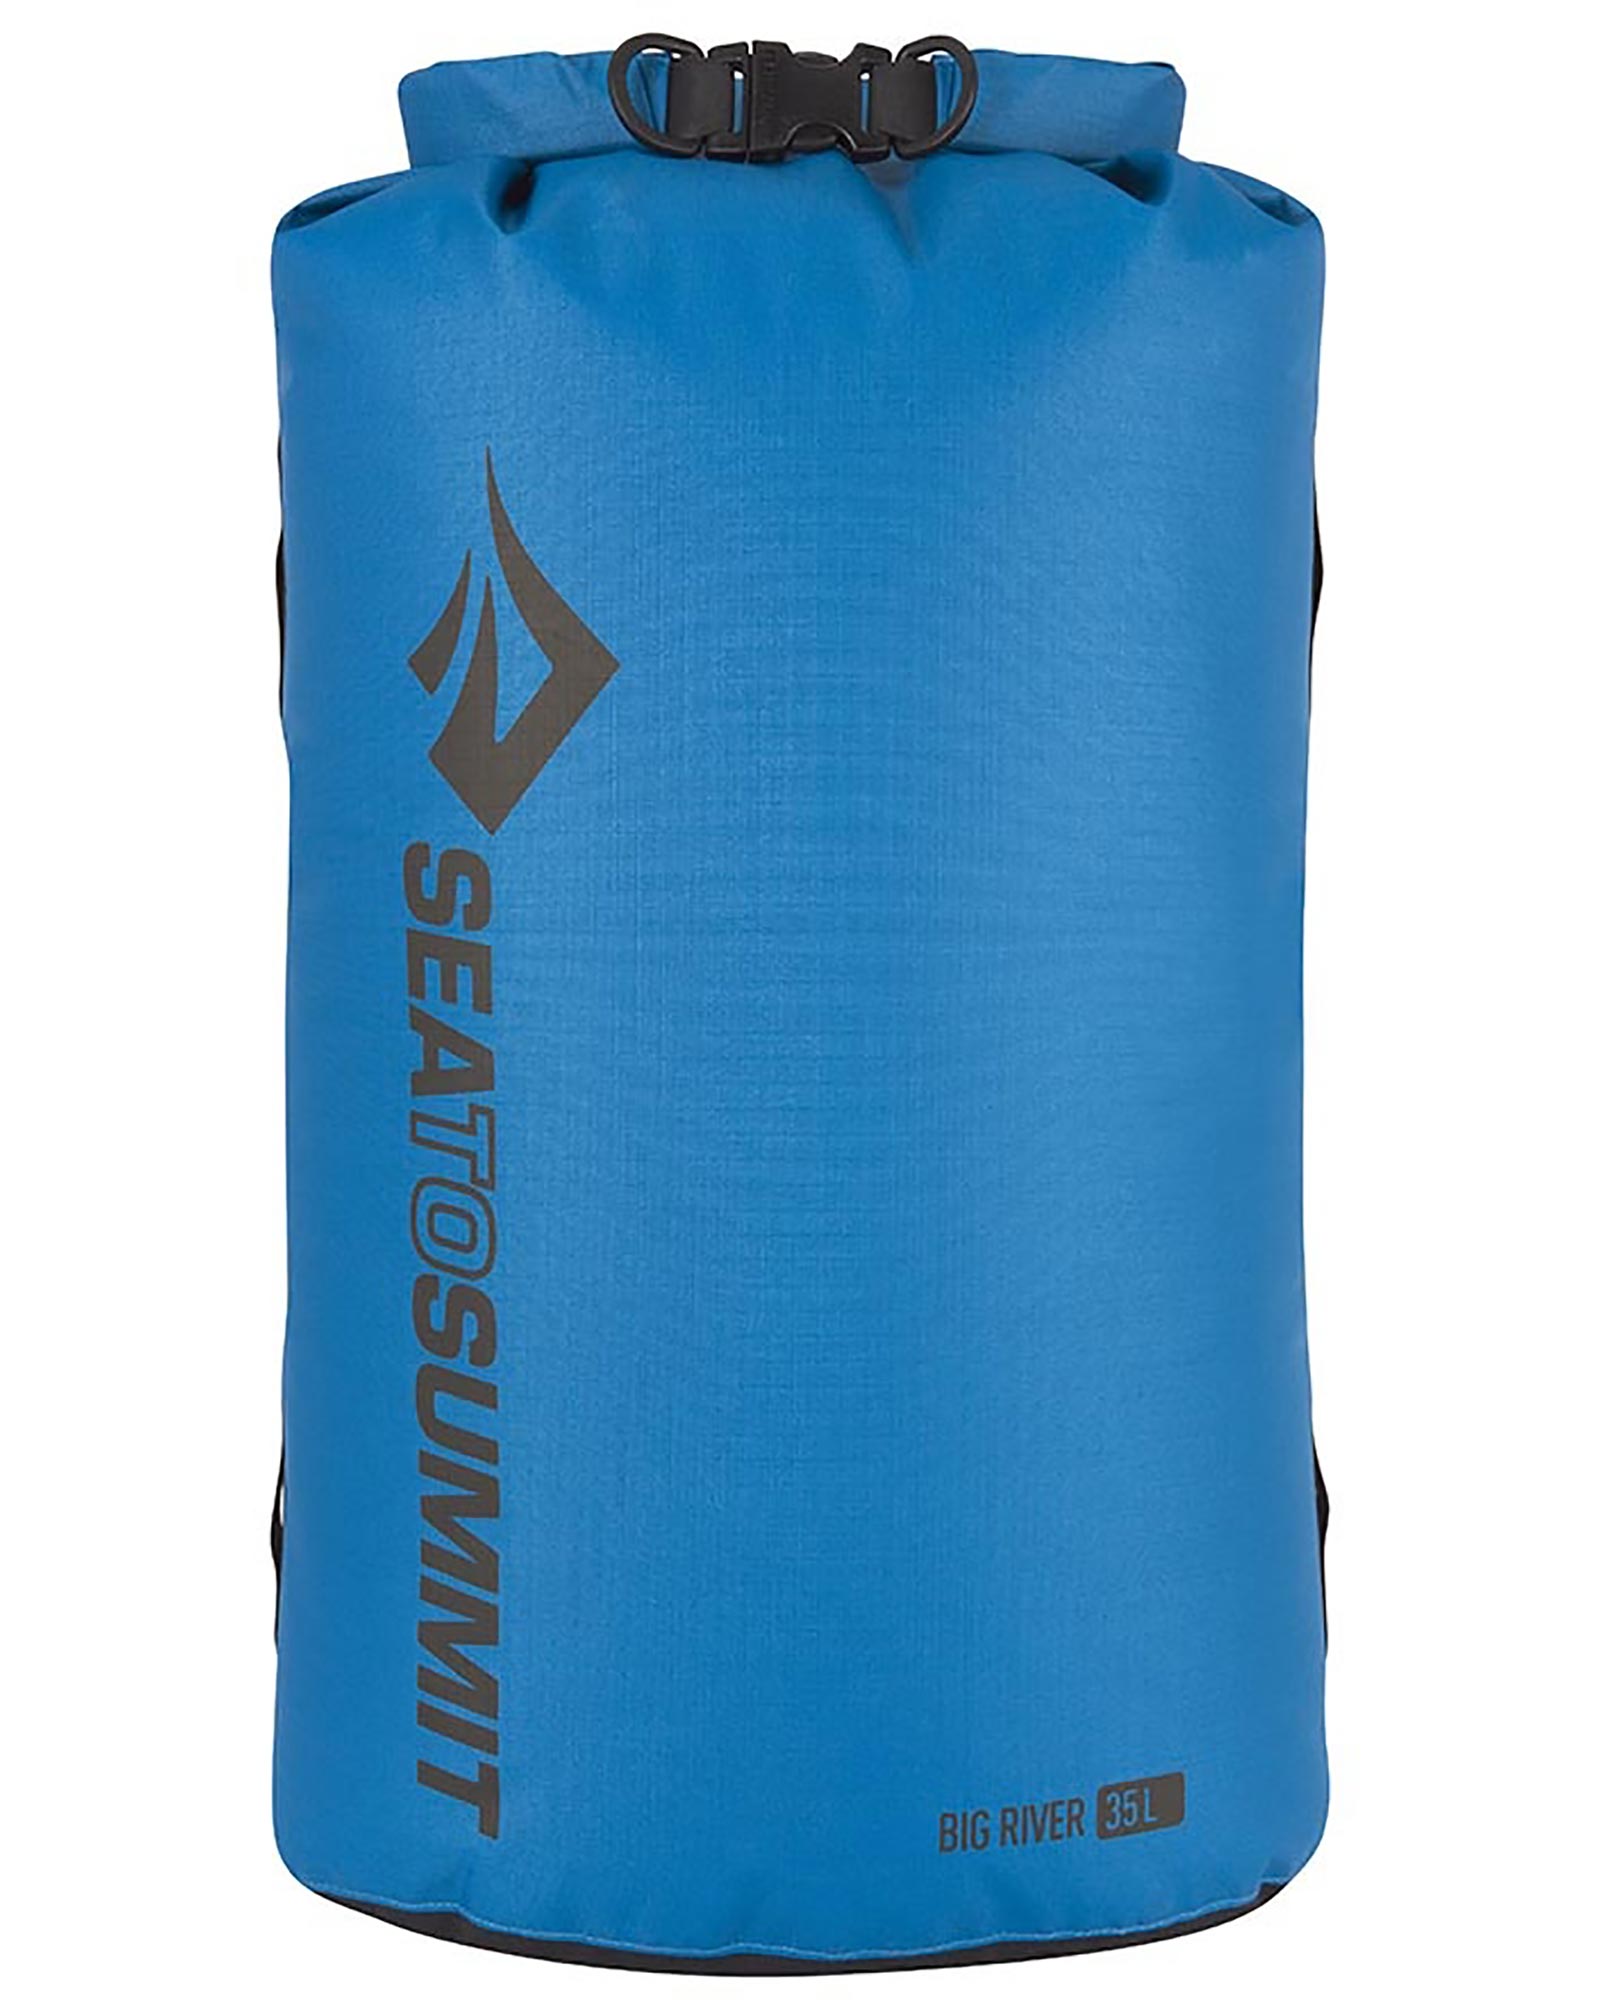 Product image of Sea to Summit Big River Dry Bag 35L